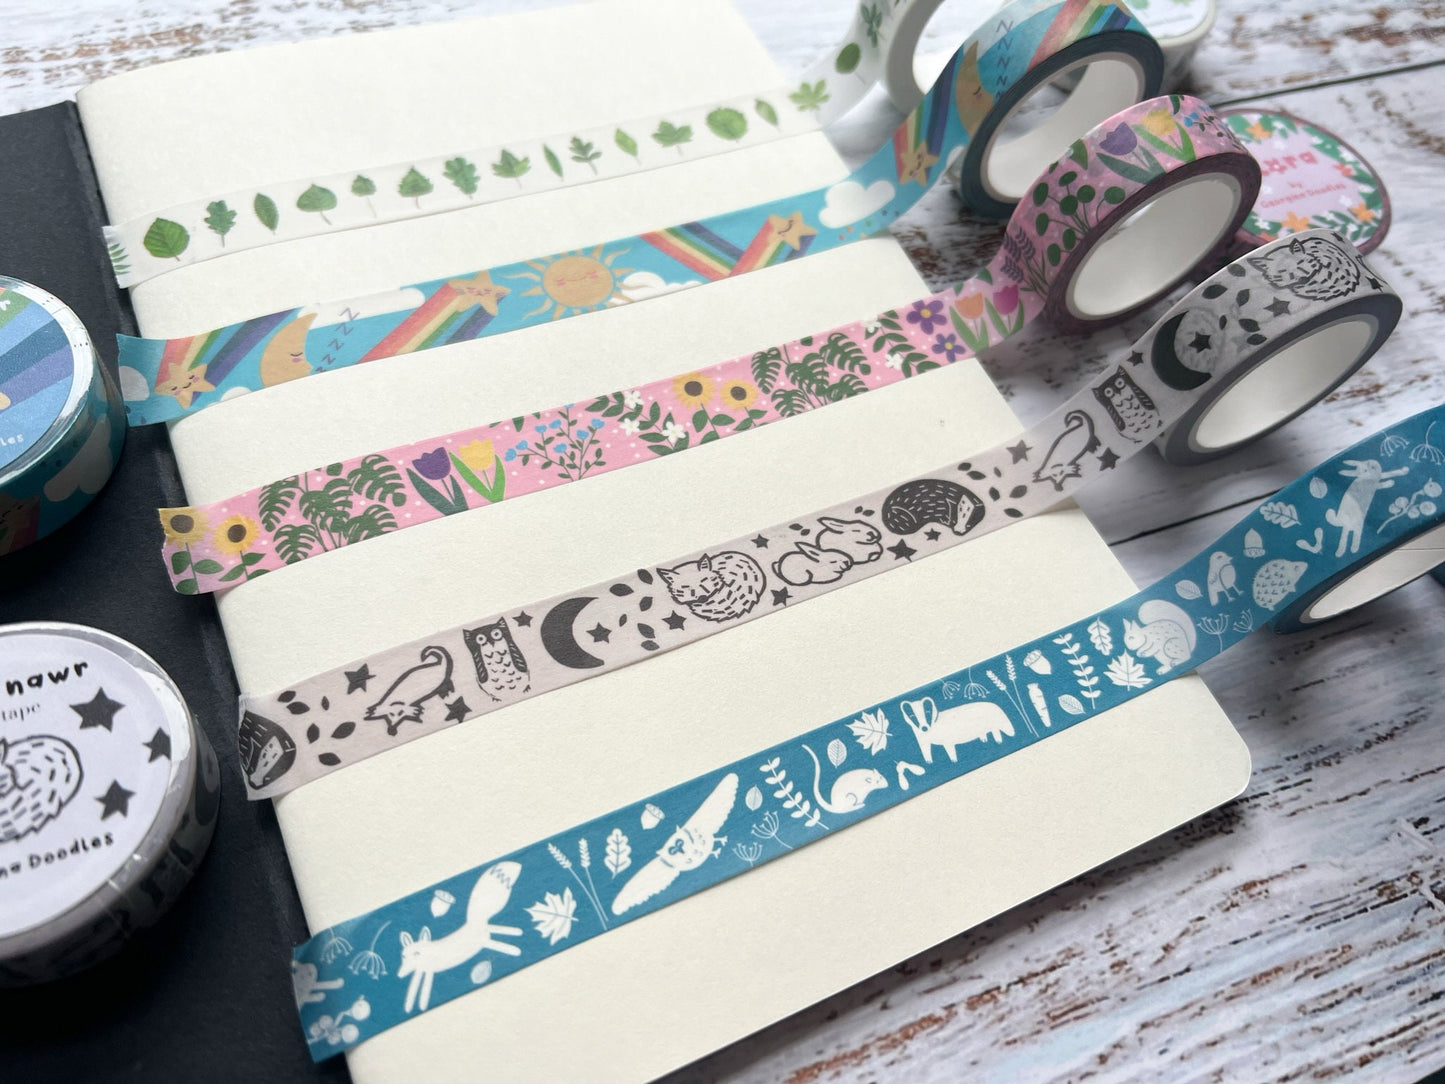 A photo of five different designs of washi tape on a notebook